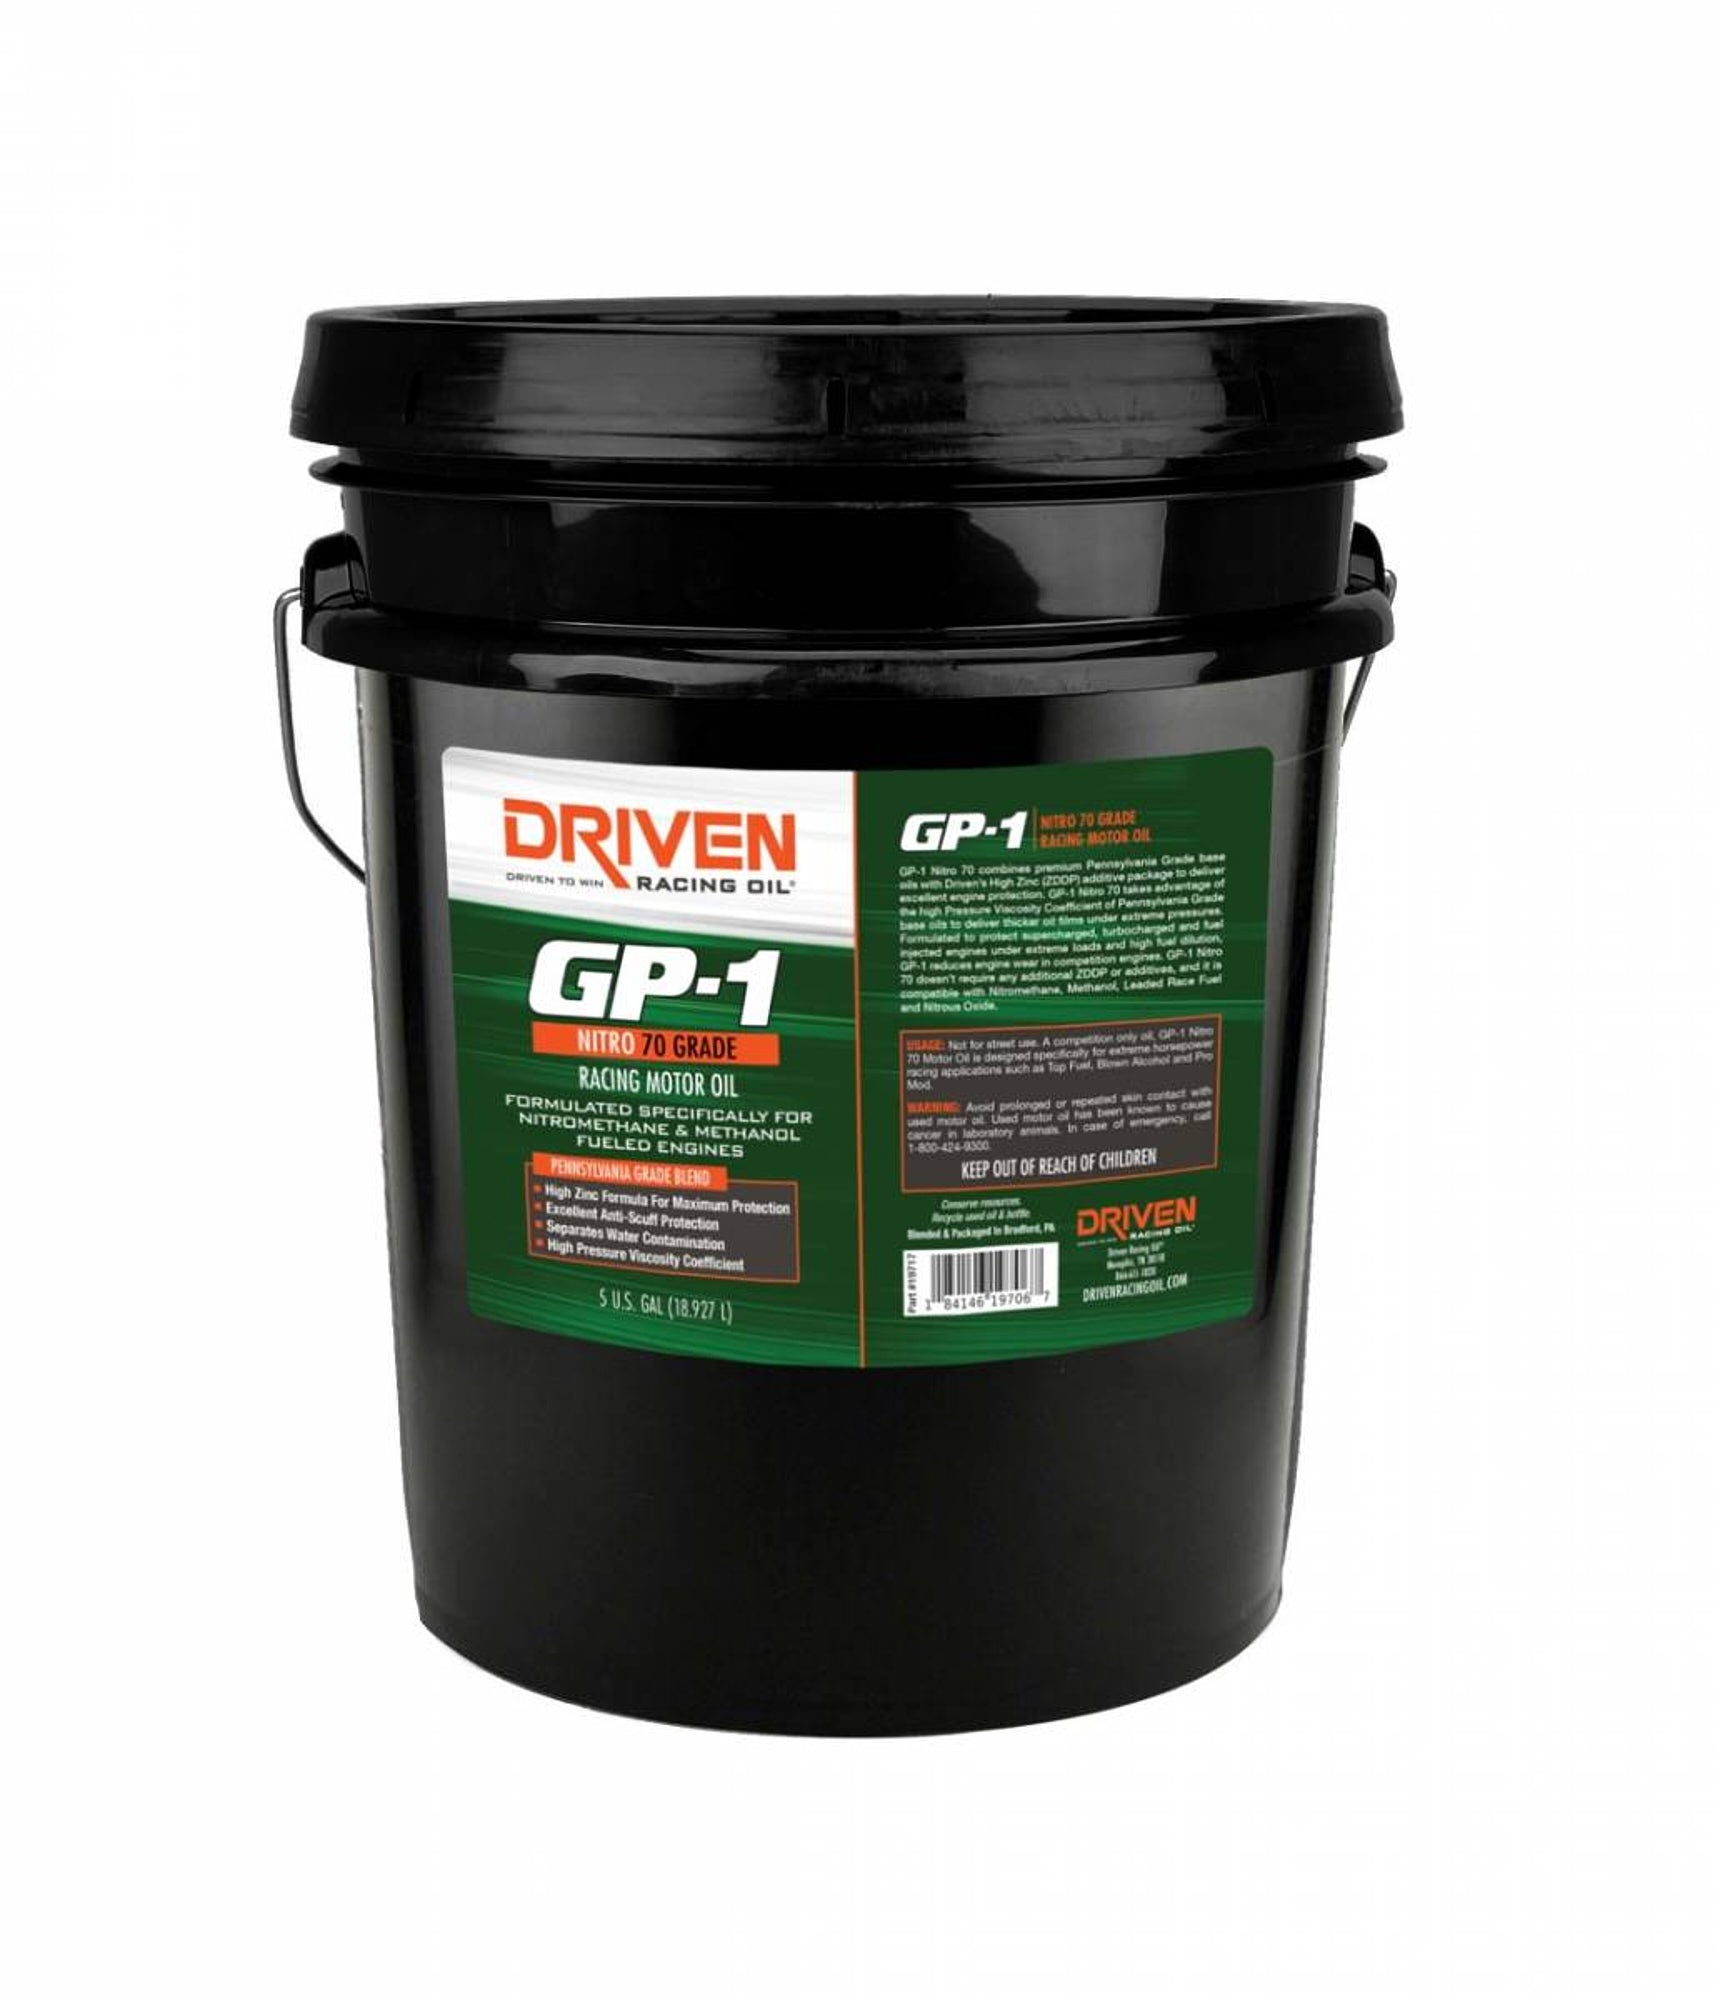 Driven Racing Oil GP-1 Nitro 70 Synthetic Blend 5 Gallon Pail Oils, Fluids and Additives Motor Oil main image